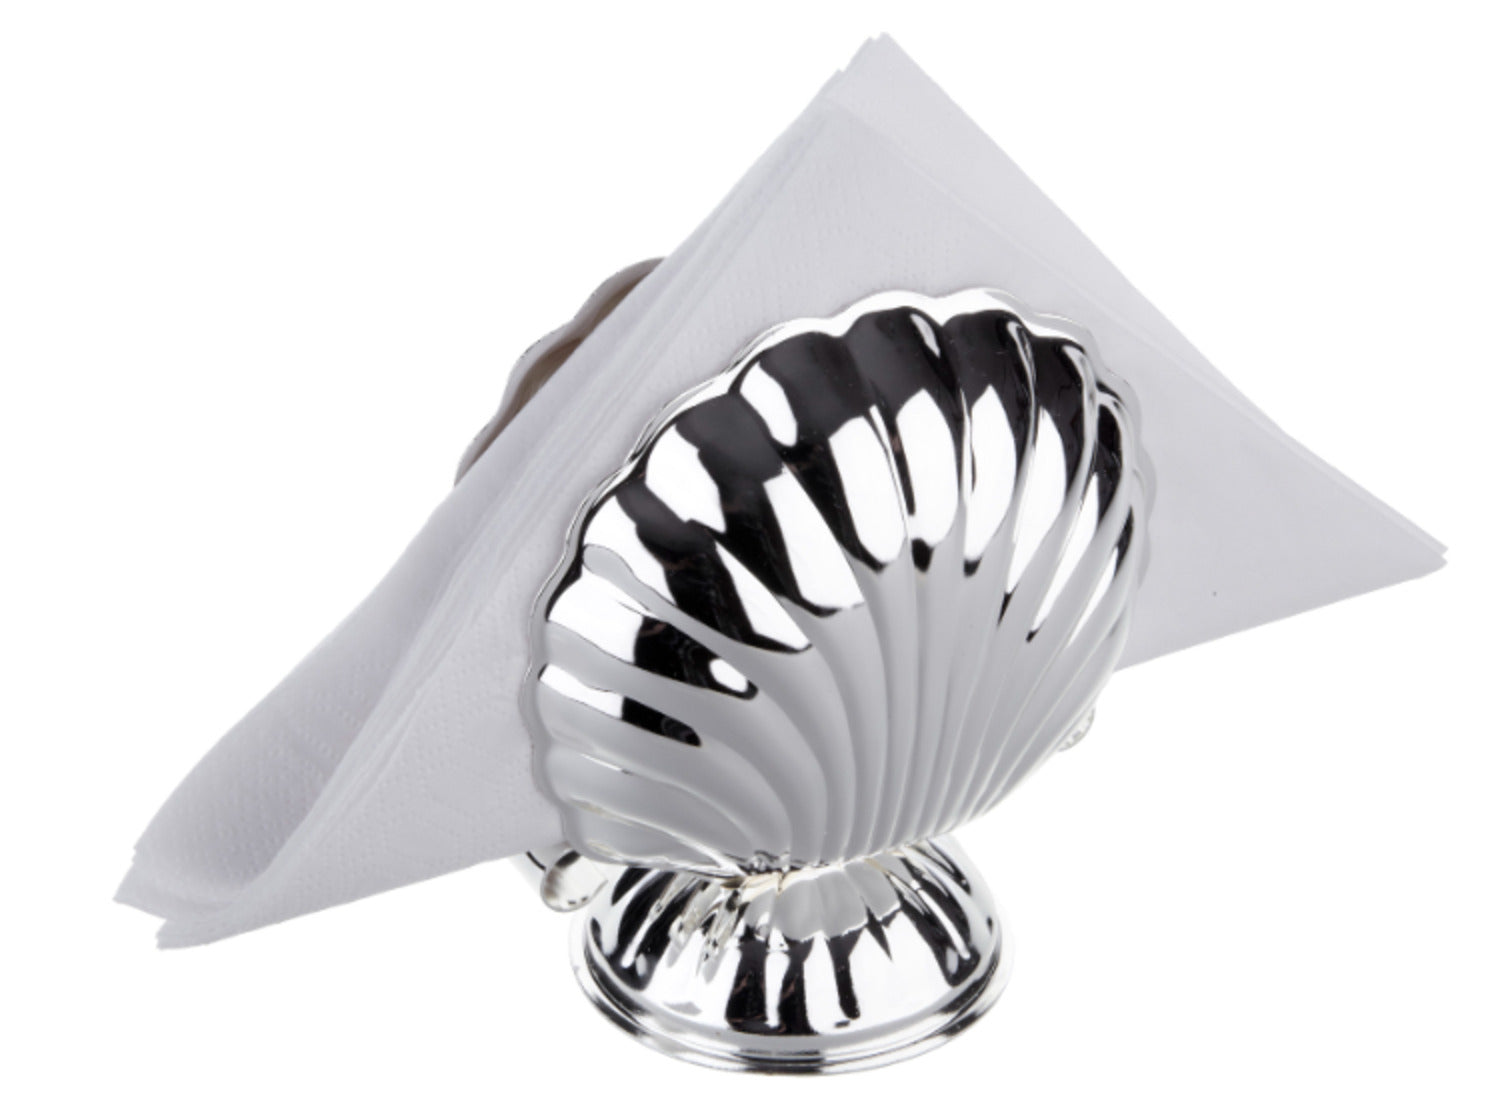 Queen Anne Napkin Holder in Shell Design -13x11cm -Silver Plated